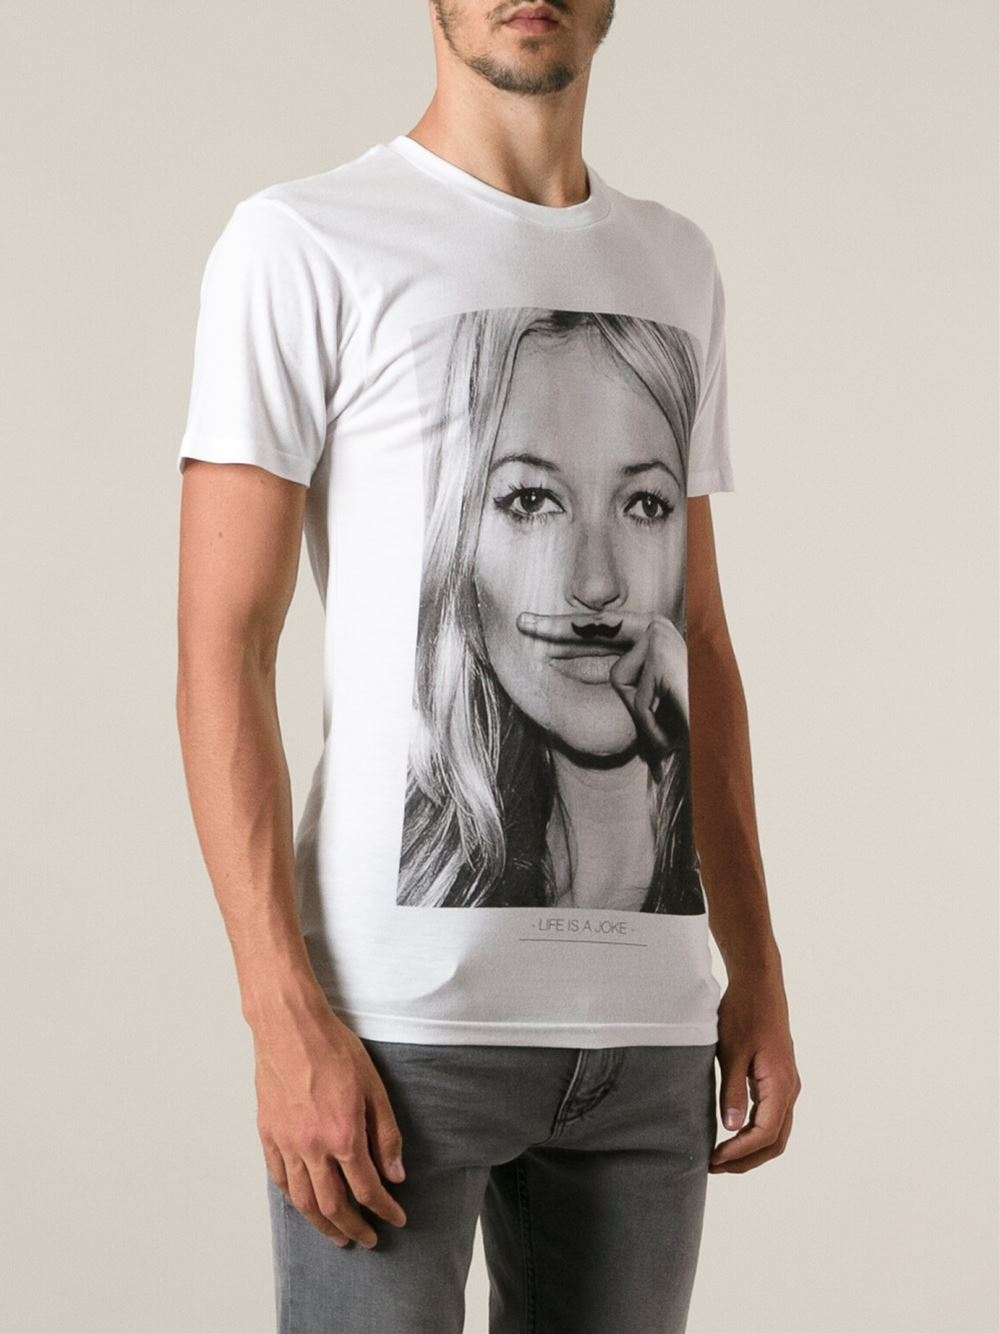 ELEVEN PARIS 'kate Moss' Print T-shirt in White for Men | Lyst